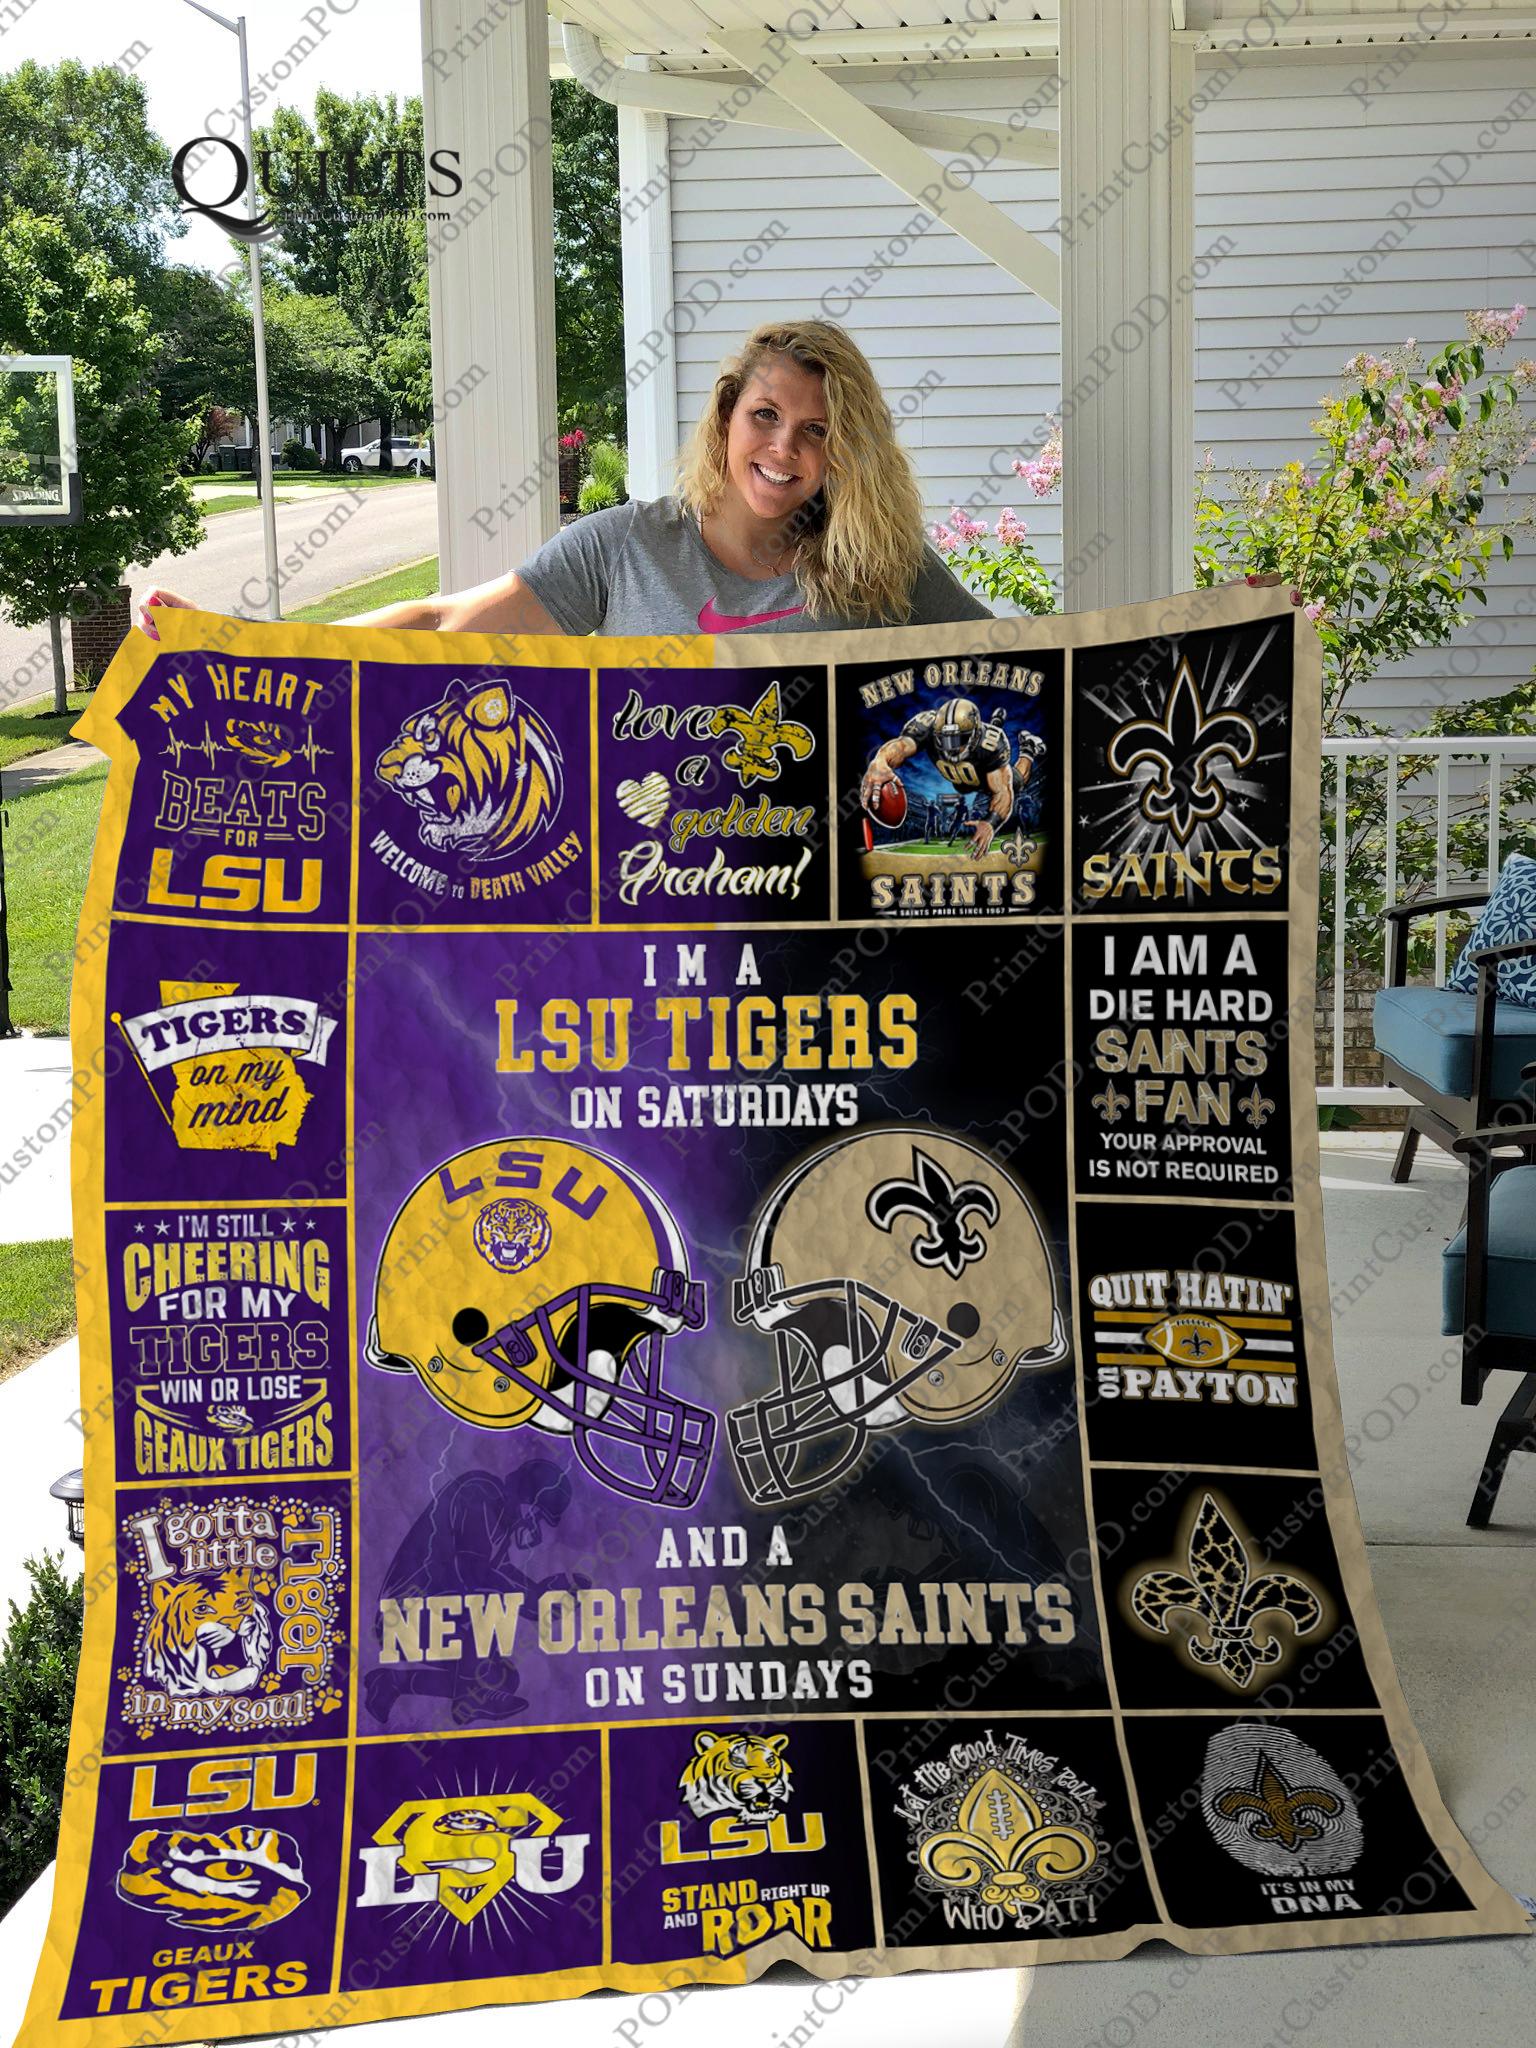 I’m a lsu tigers on saturdays and a new orleans saints on sundays blanket - 3